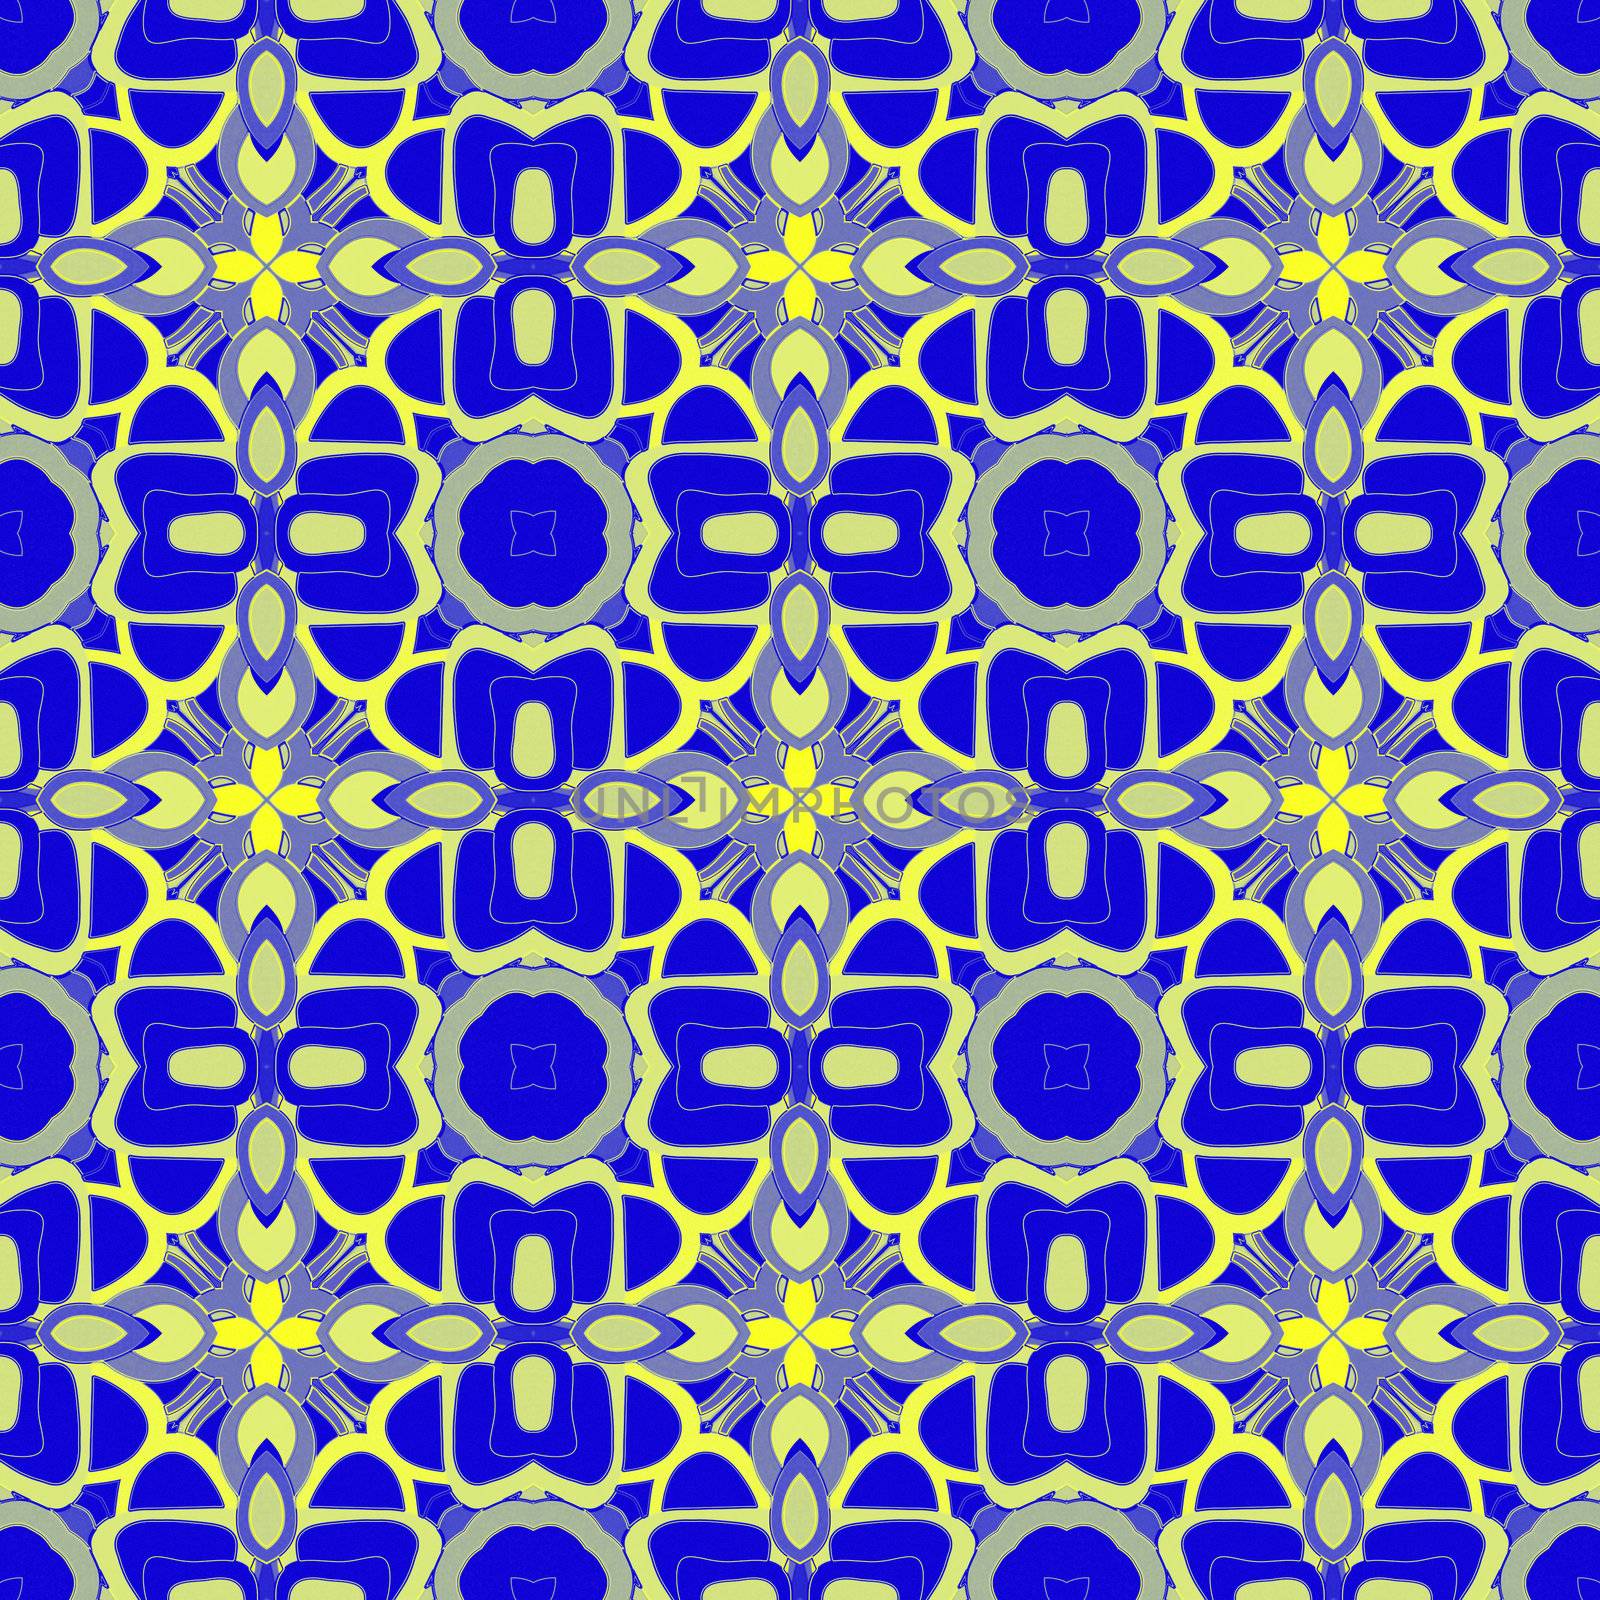 seamless texture of abstract repeating yellow star shapes on blue